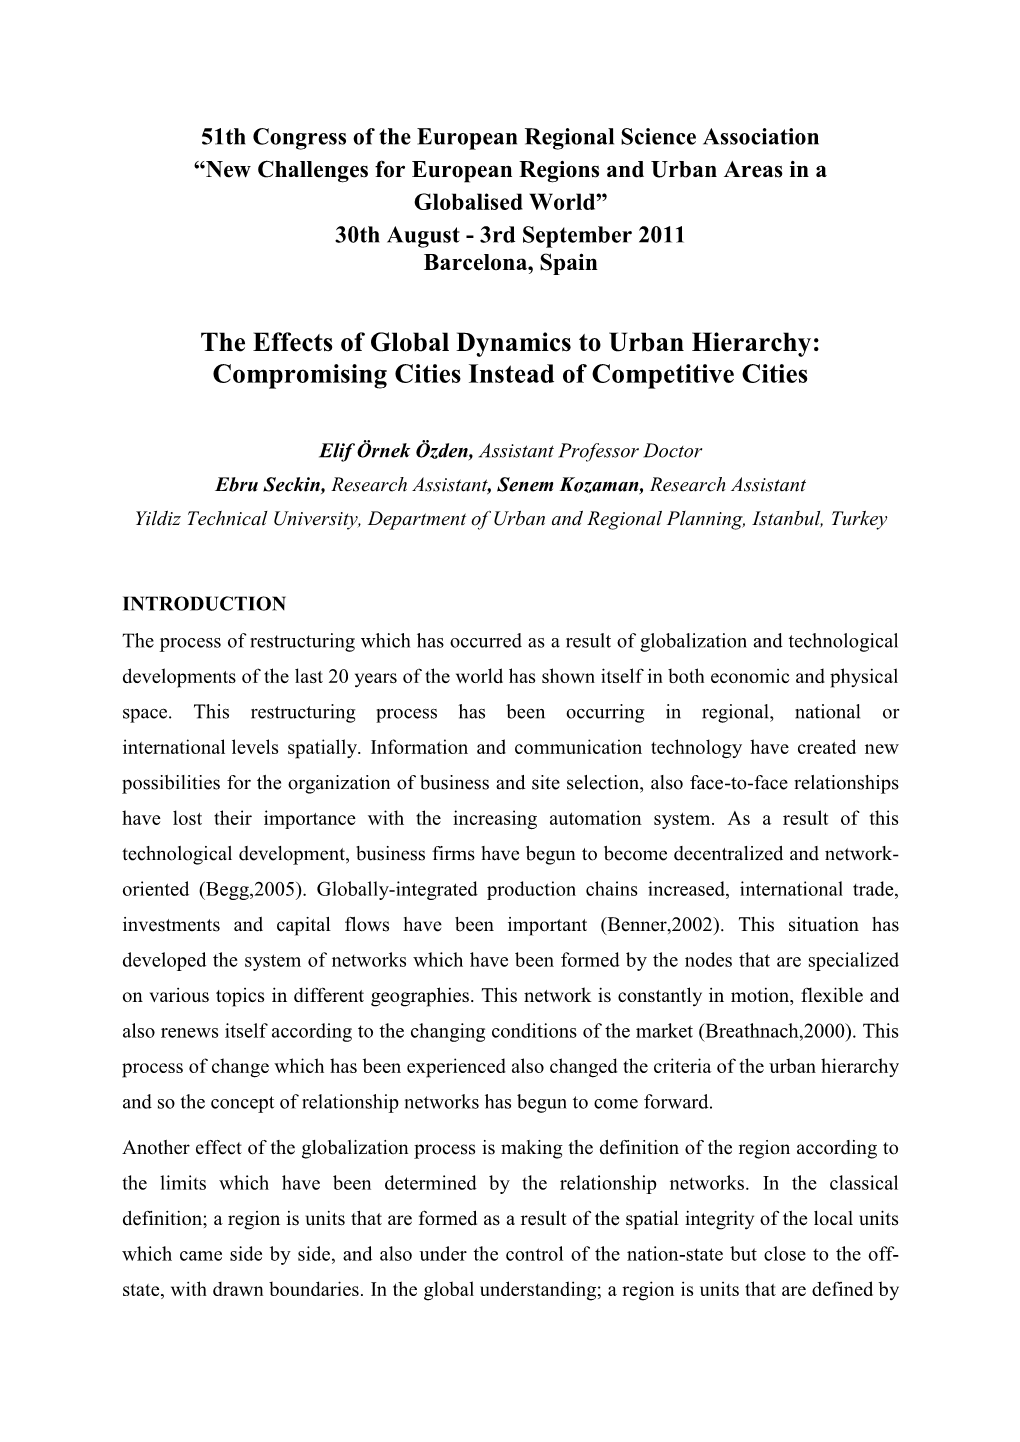 The Effects of Global Dynamics to Urban Hierarchy: Compromising Cities Instead of Competitive Cities